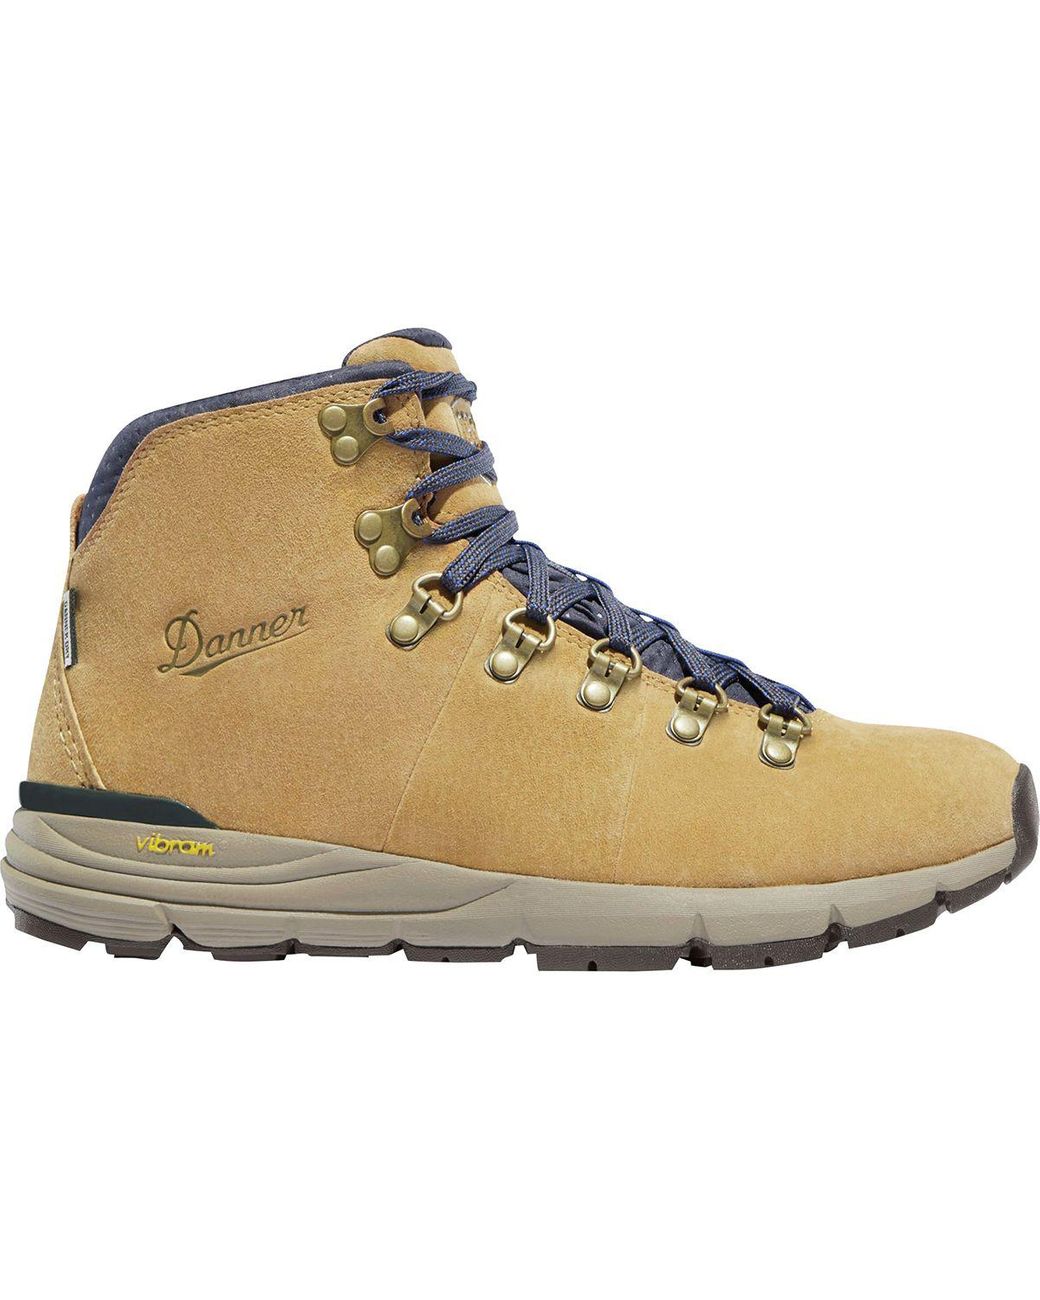 Danner Suede Mountain 600 Hiking Boot in Sand (Natural) - Lyst